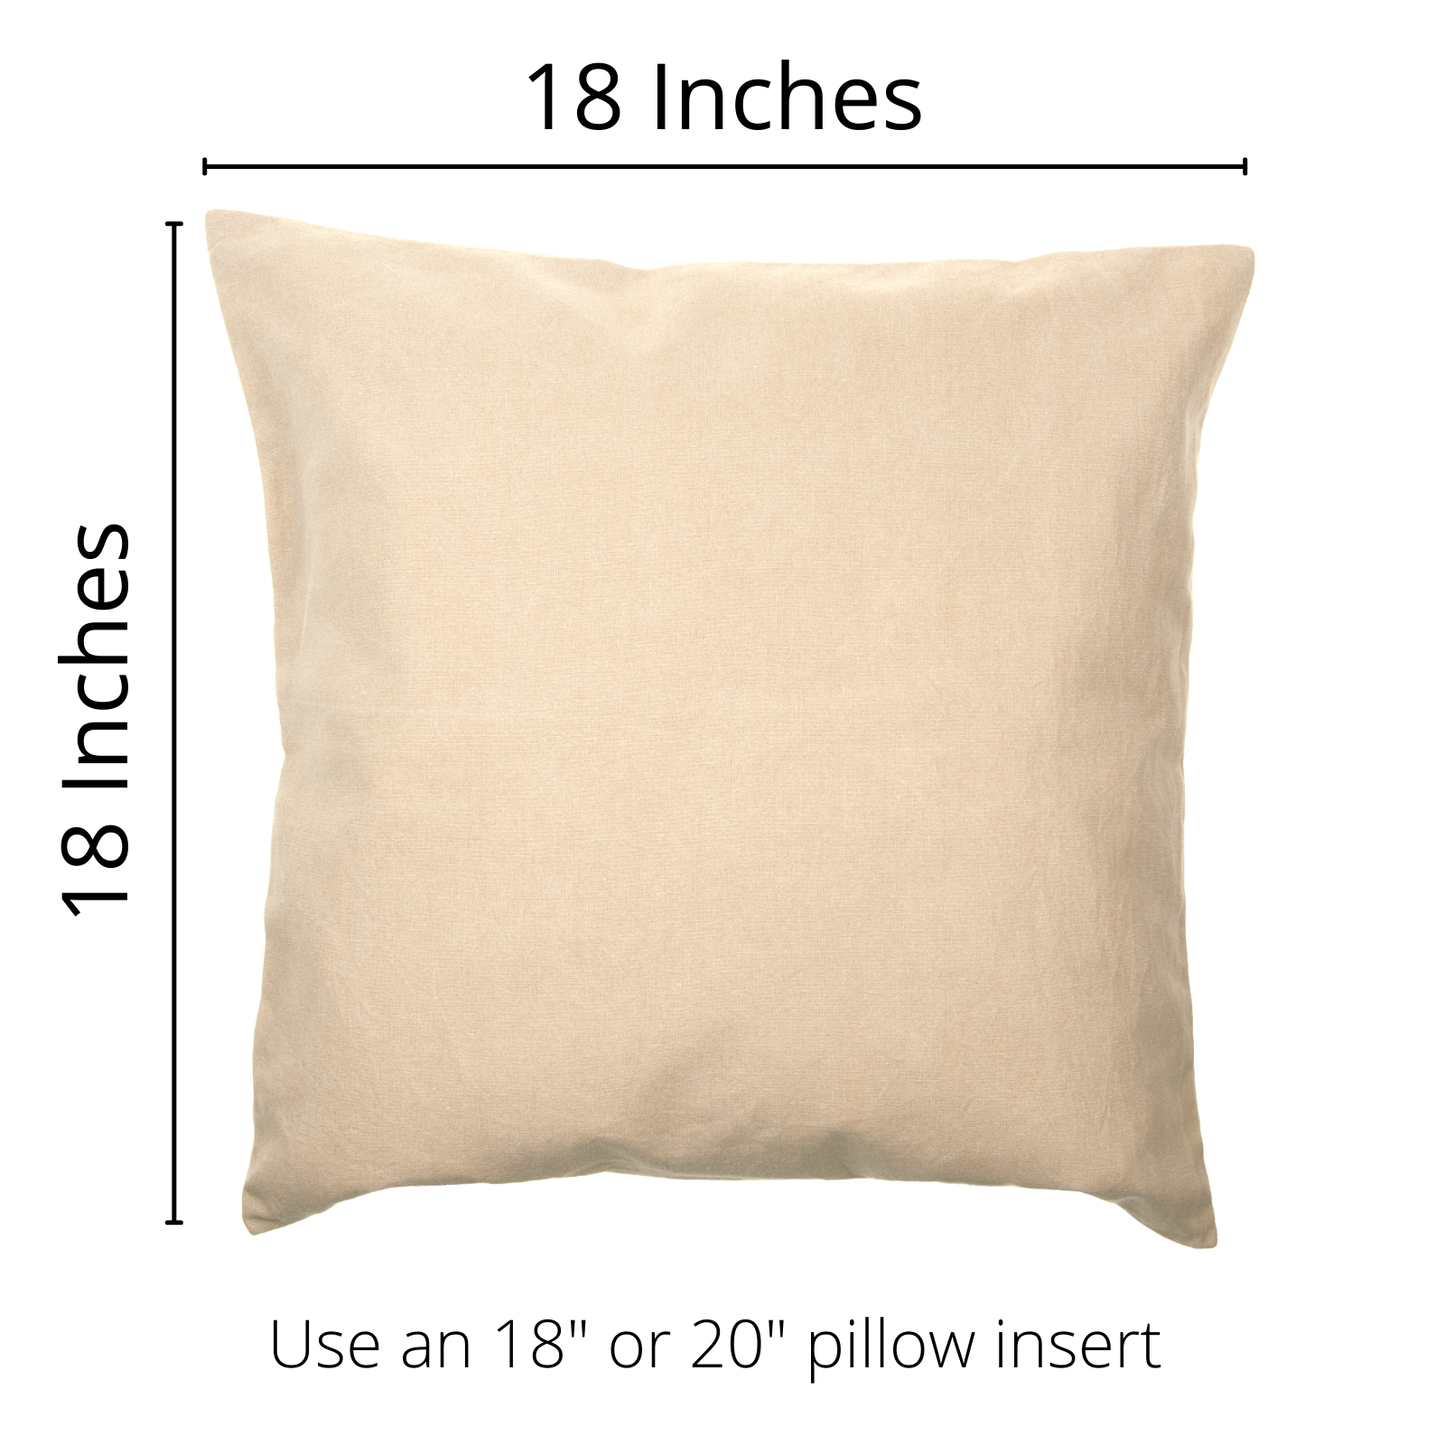 United We Stand Pillow Cover